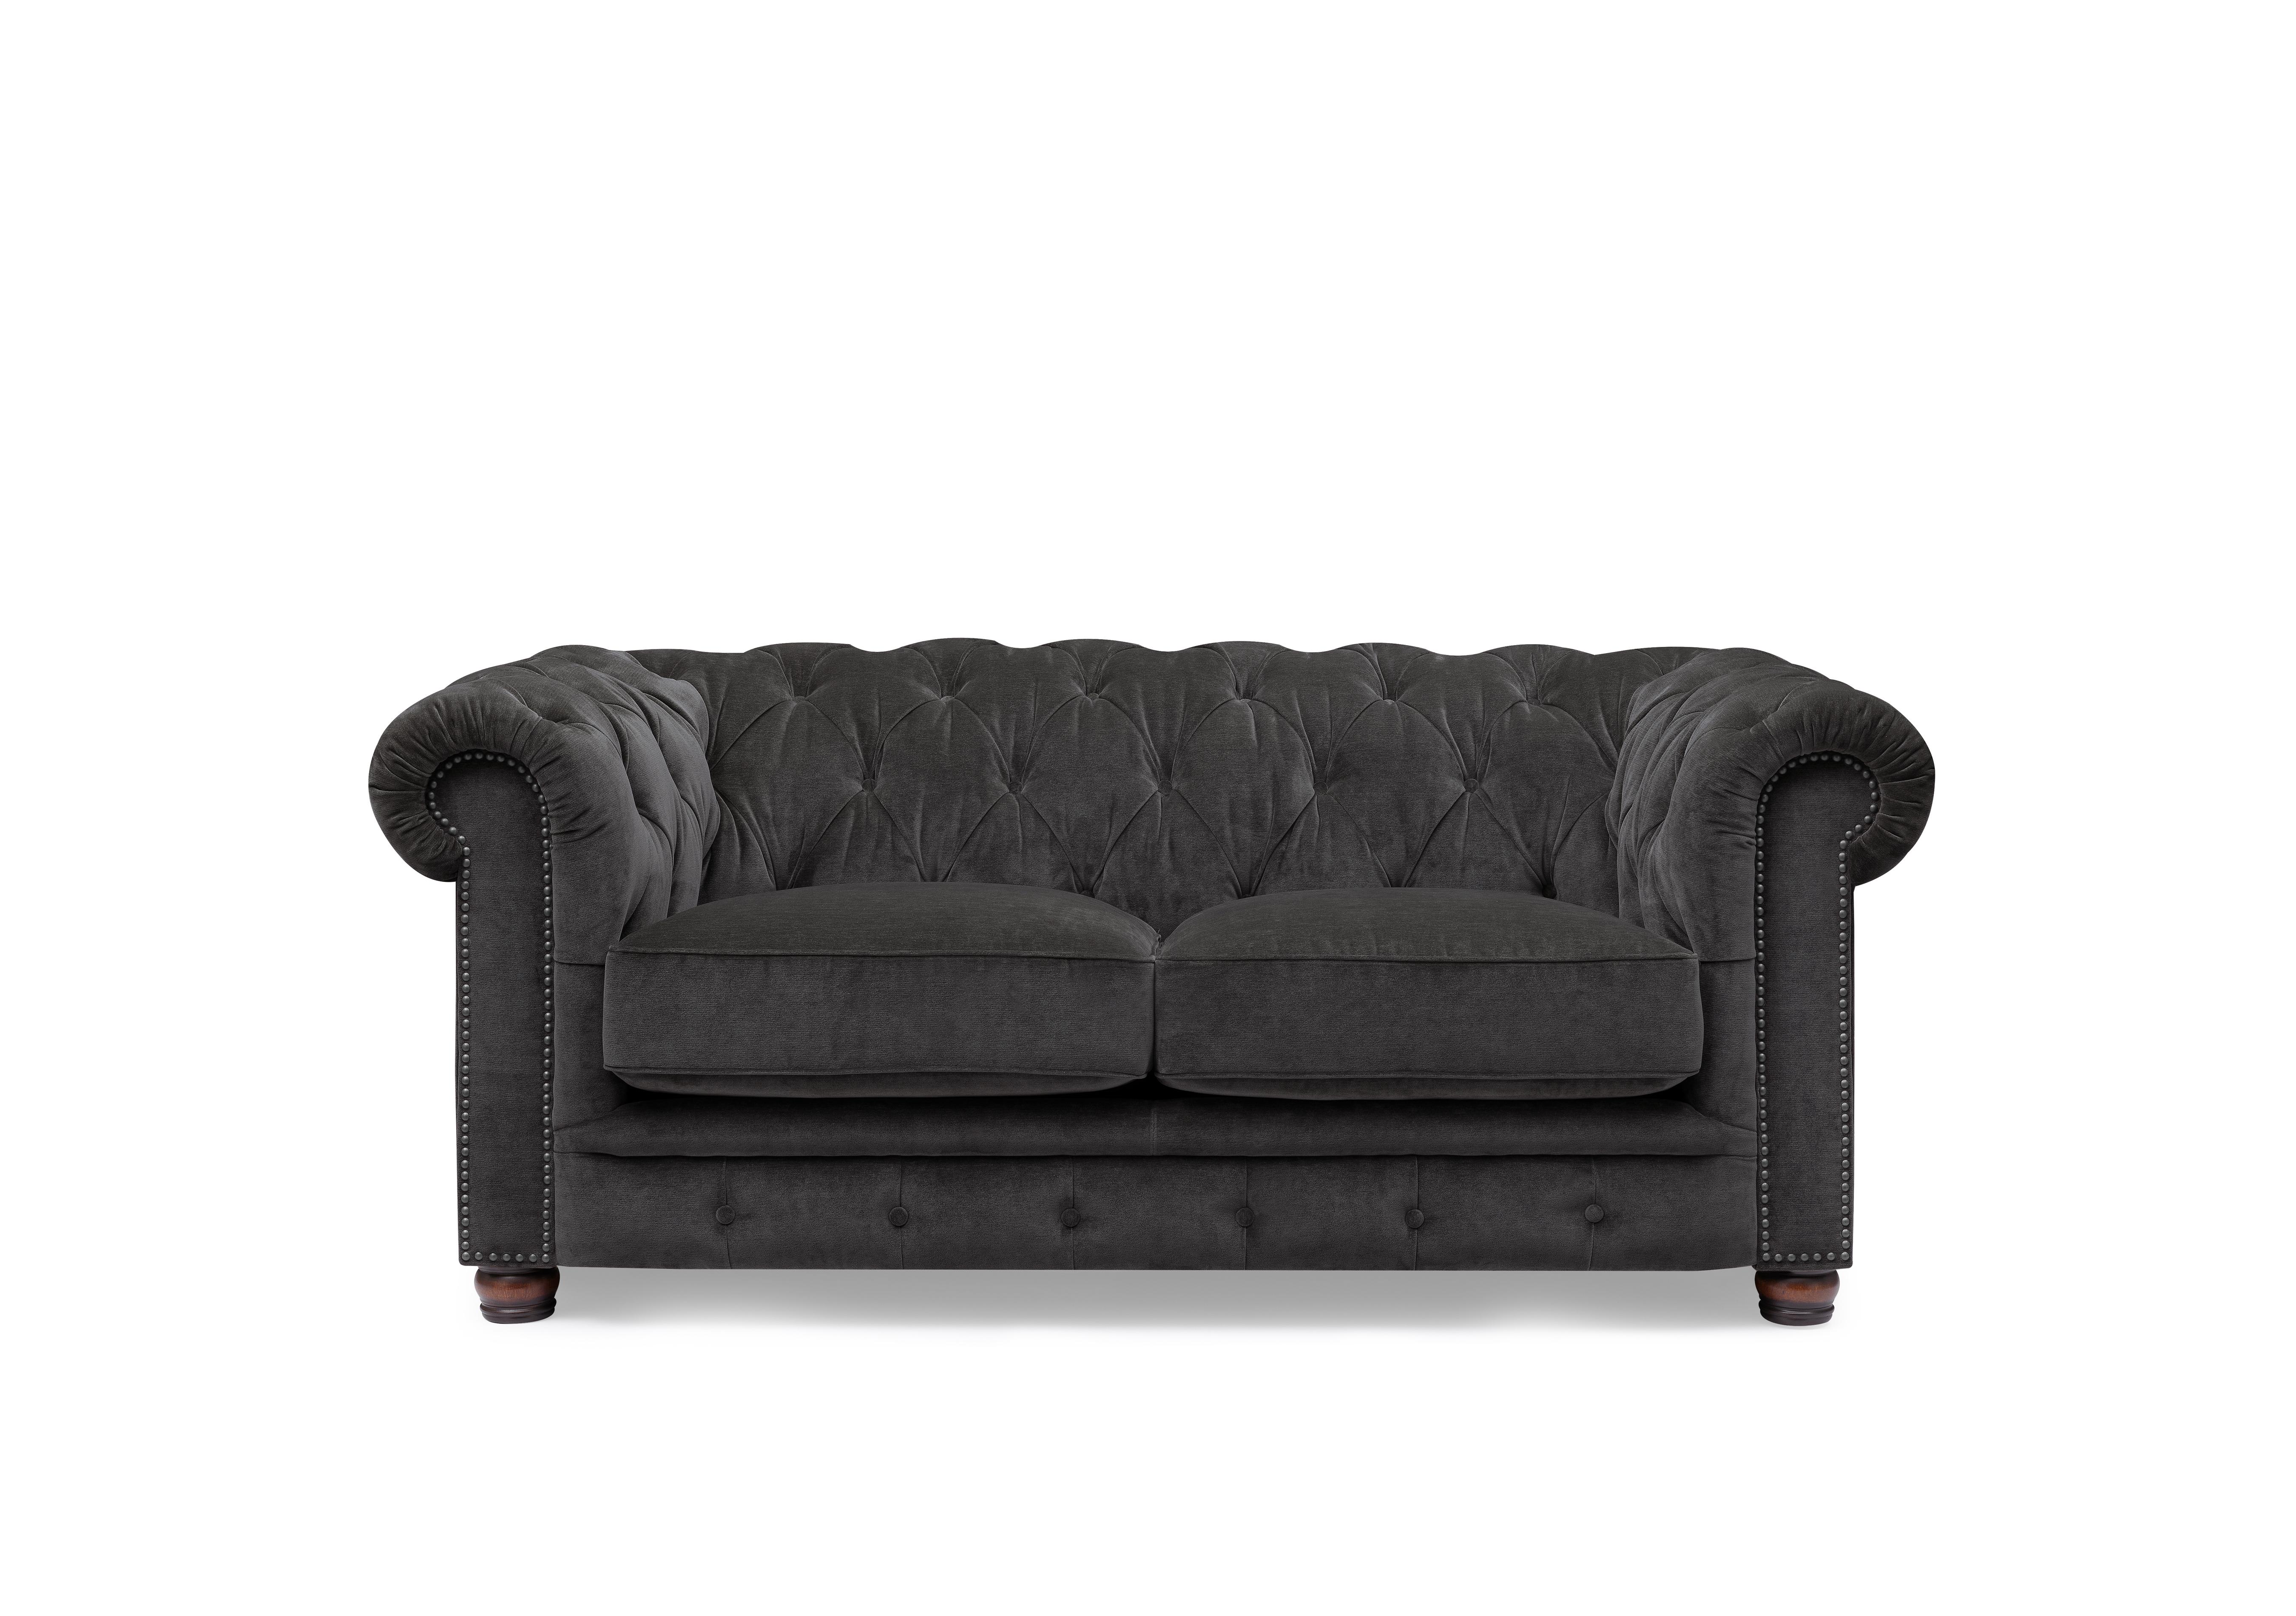 Shackleton 2 Seater Fabric Chesterfield Sofa with USB-C in X3y2-W021 Moonstone on Furniture Village